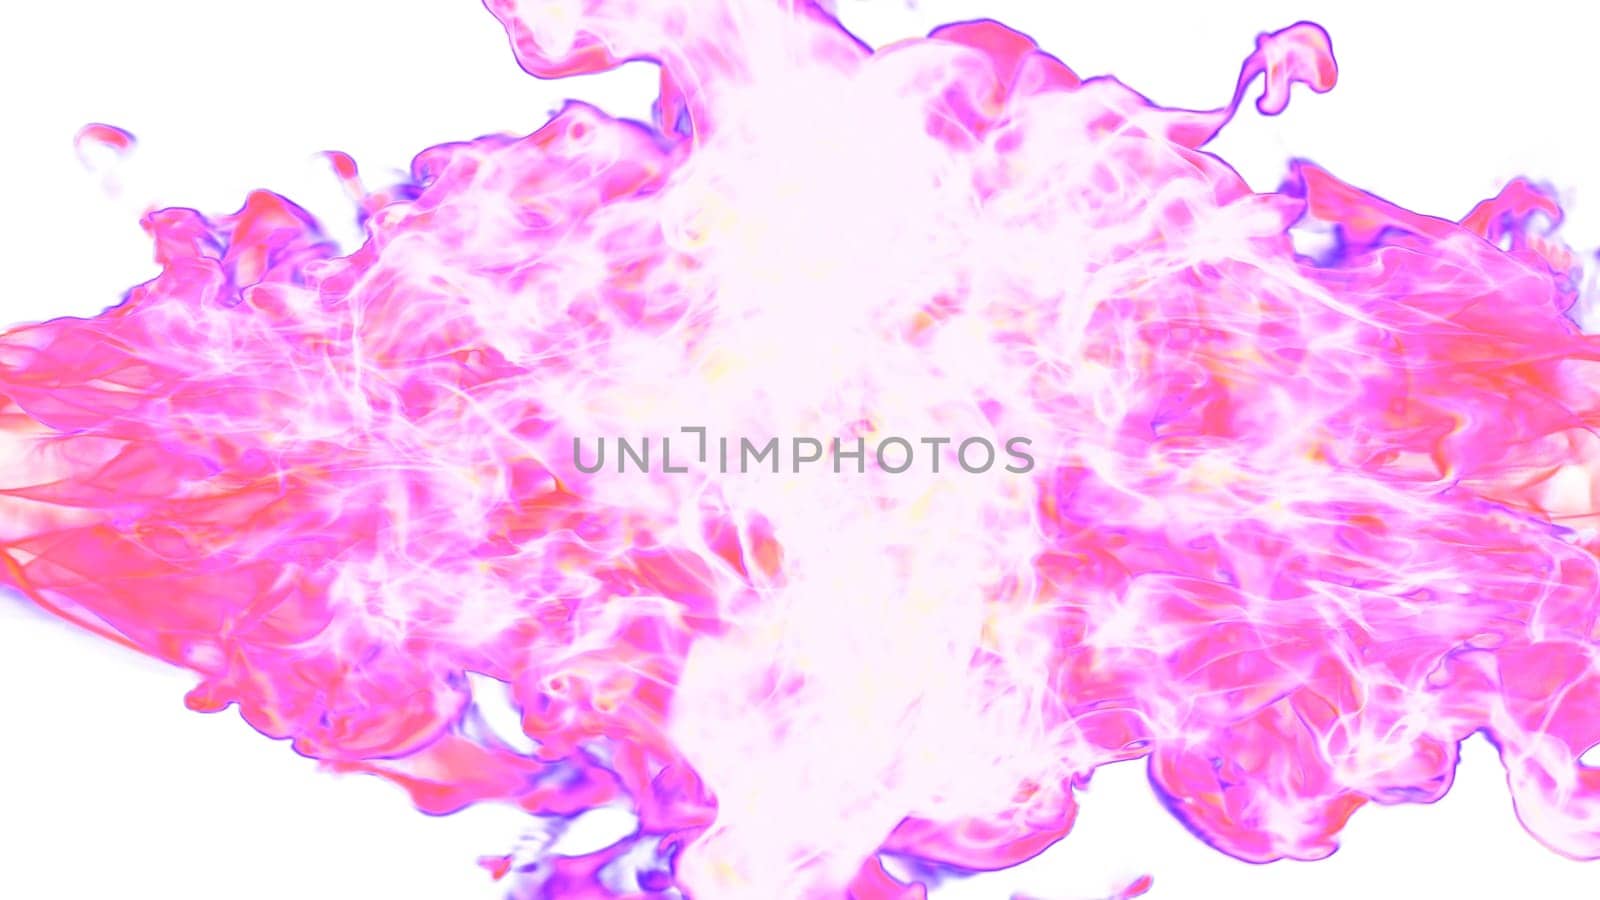 3d illustration. Tongues of pink flame collide from opposite sides on a white background. by mrwed54